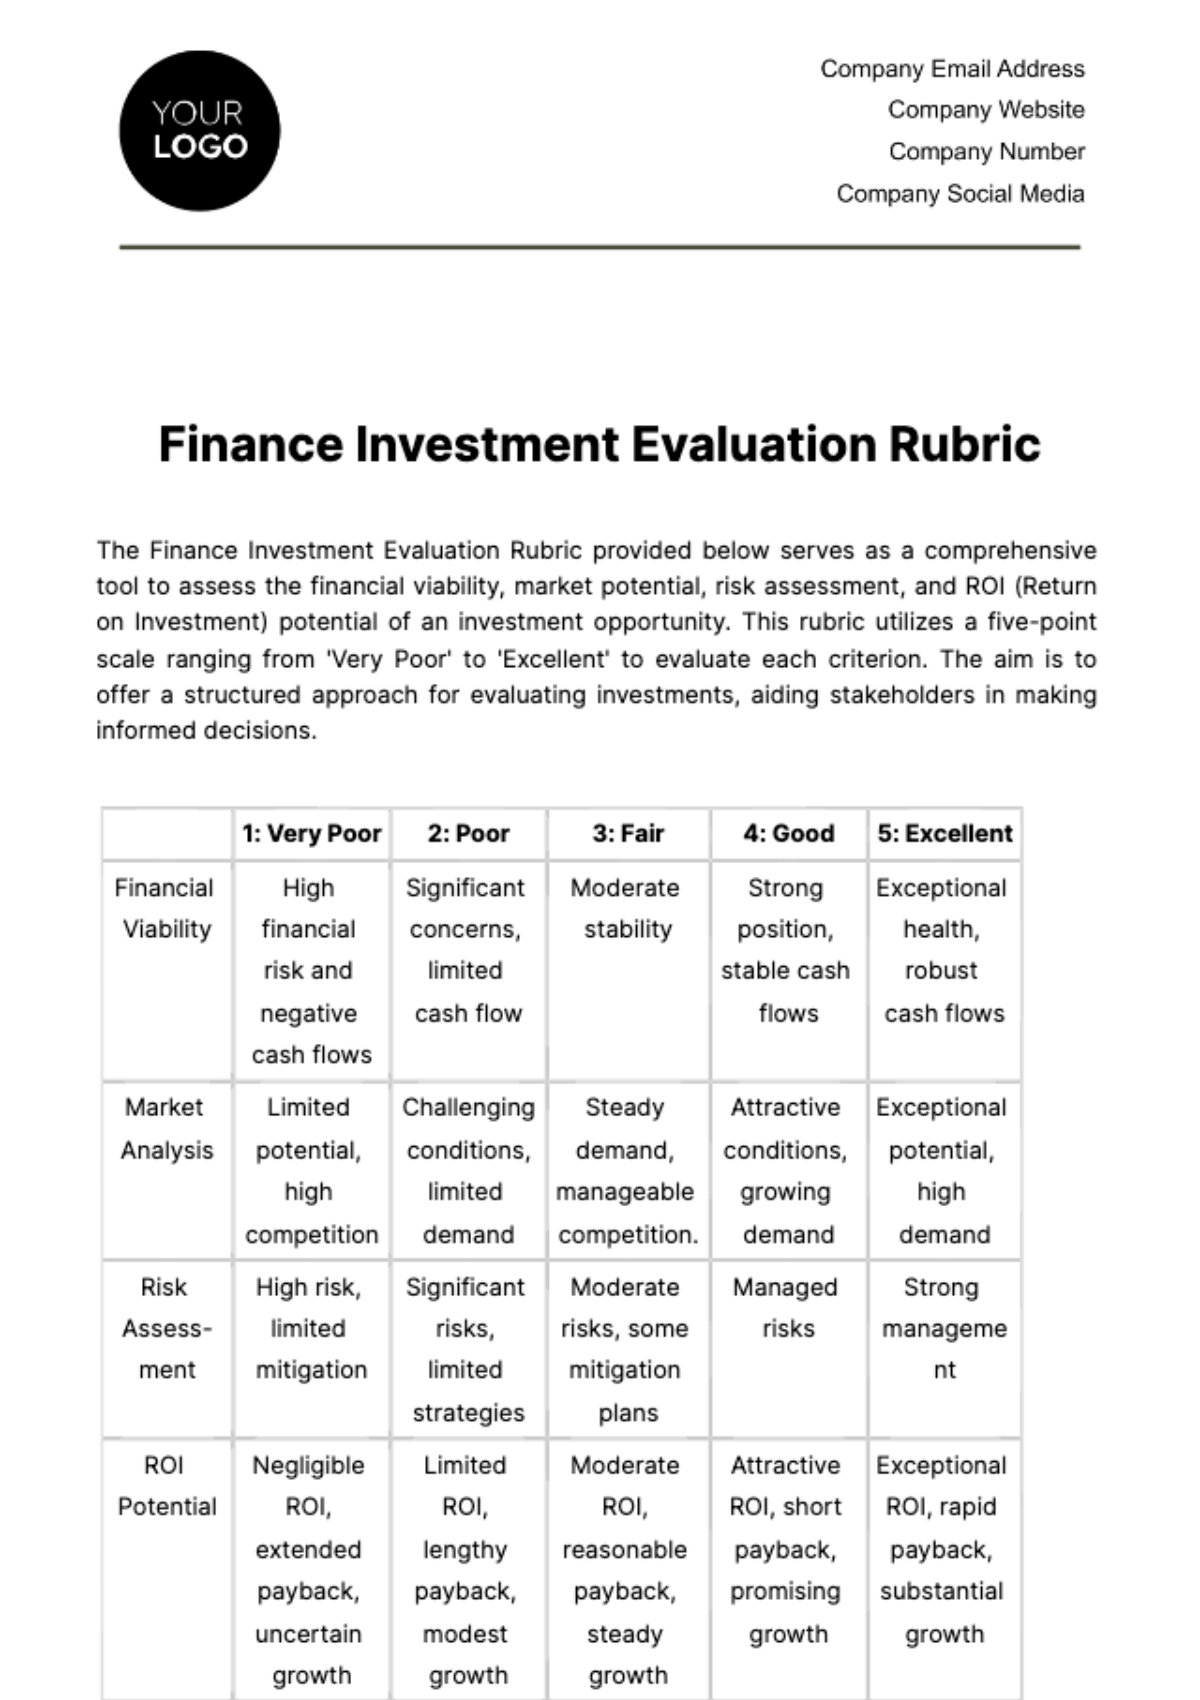 Finance Investment Evaluation Rubric Template